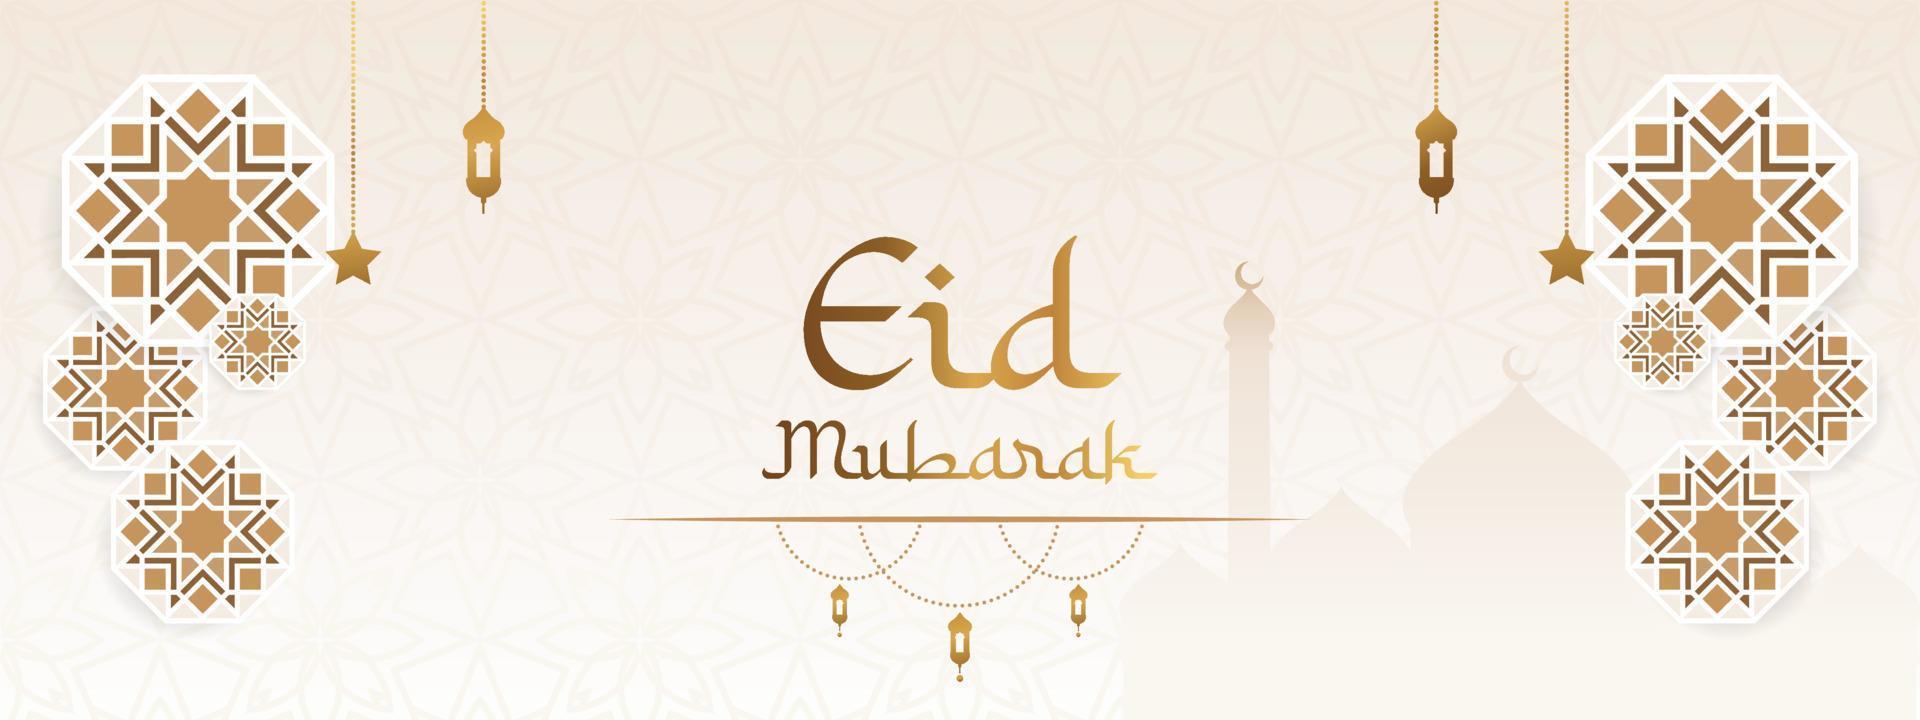 Eid Mubarak Islamic banner with ornaments and floral pattern background vector